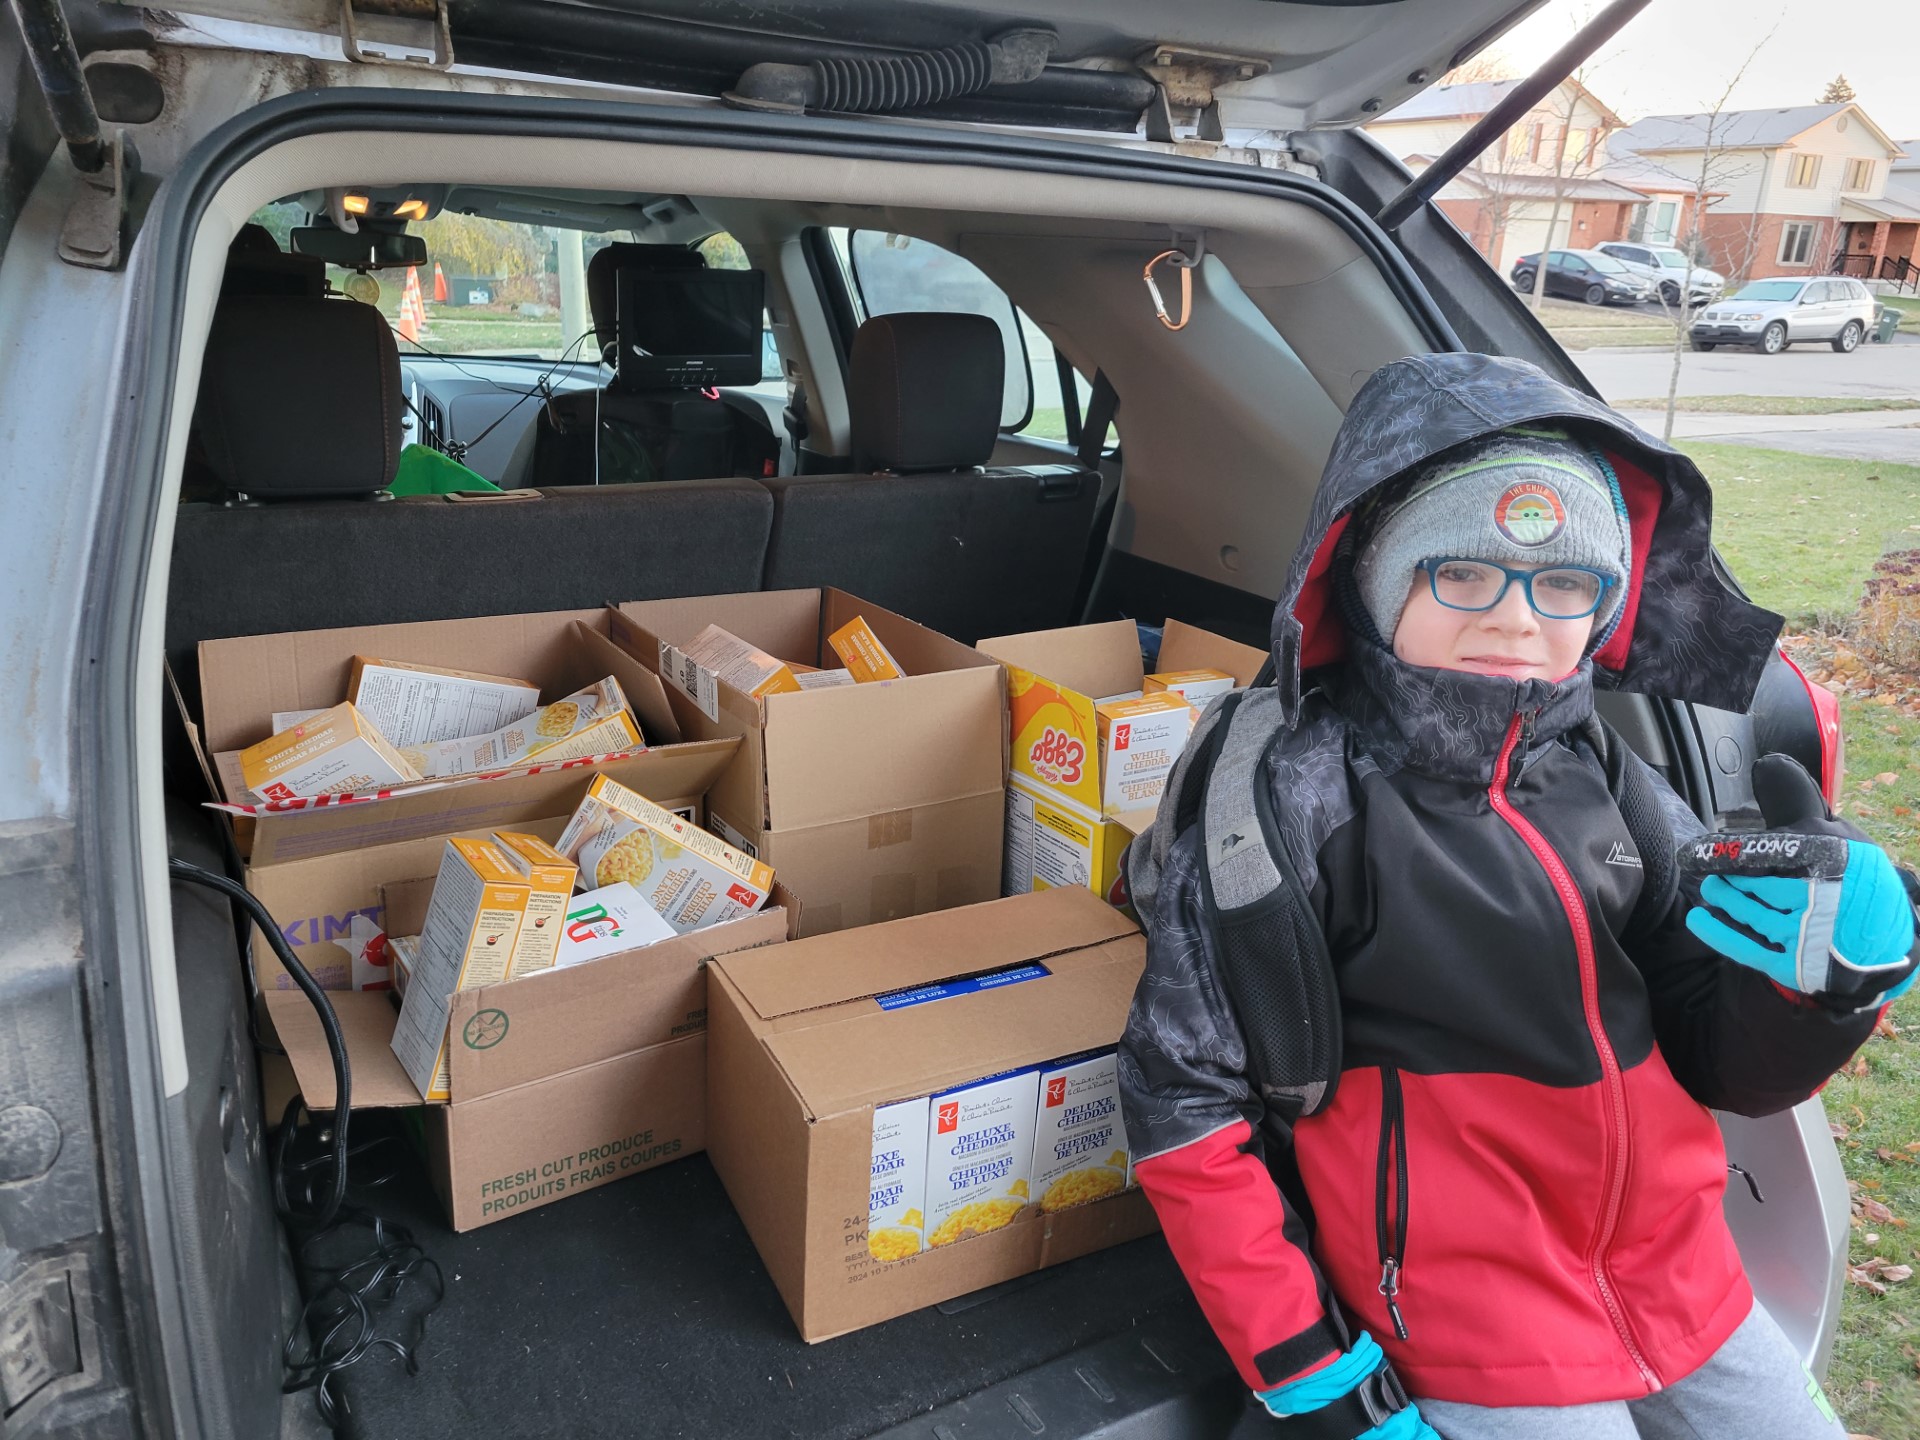 Zack pictured with food collected